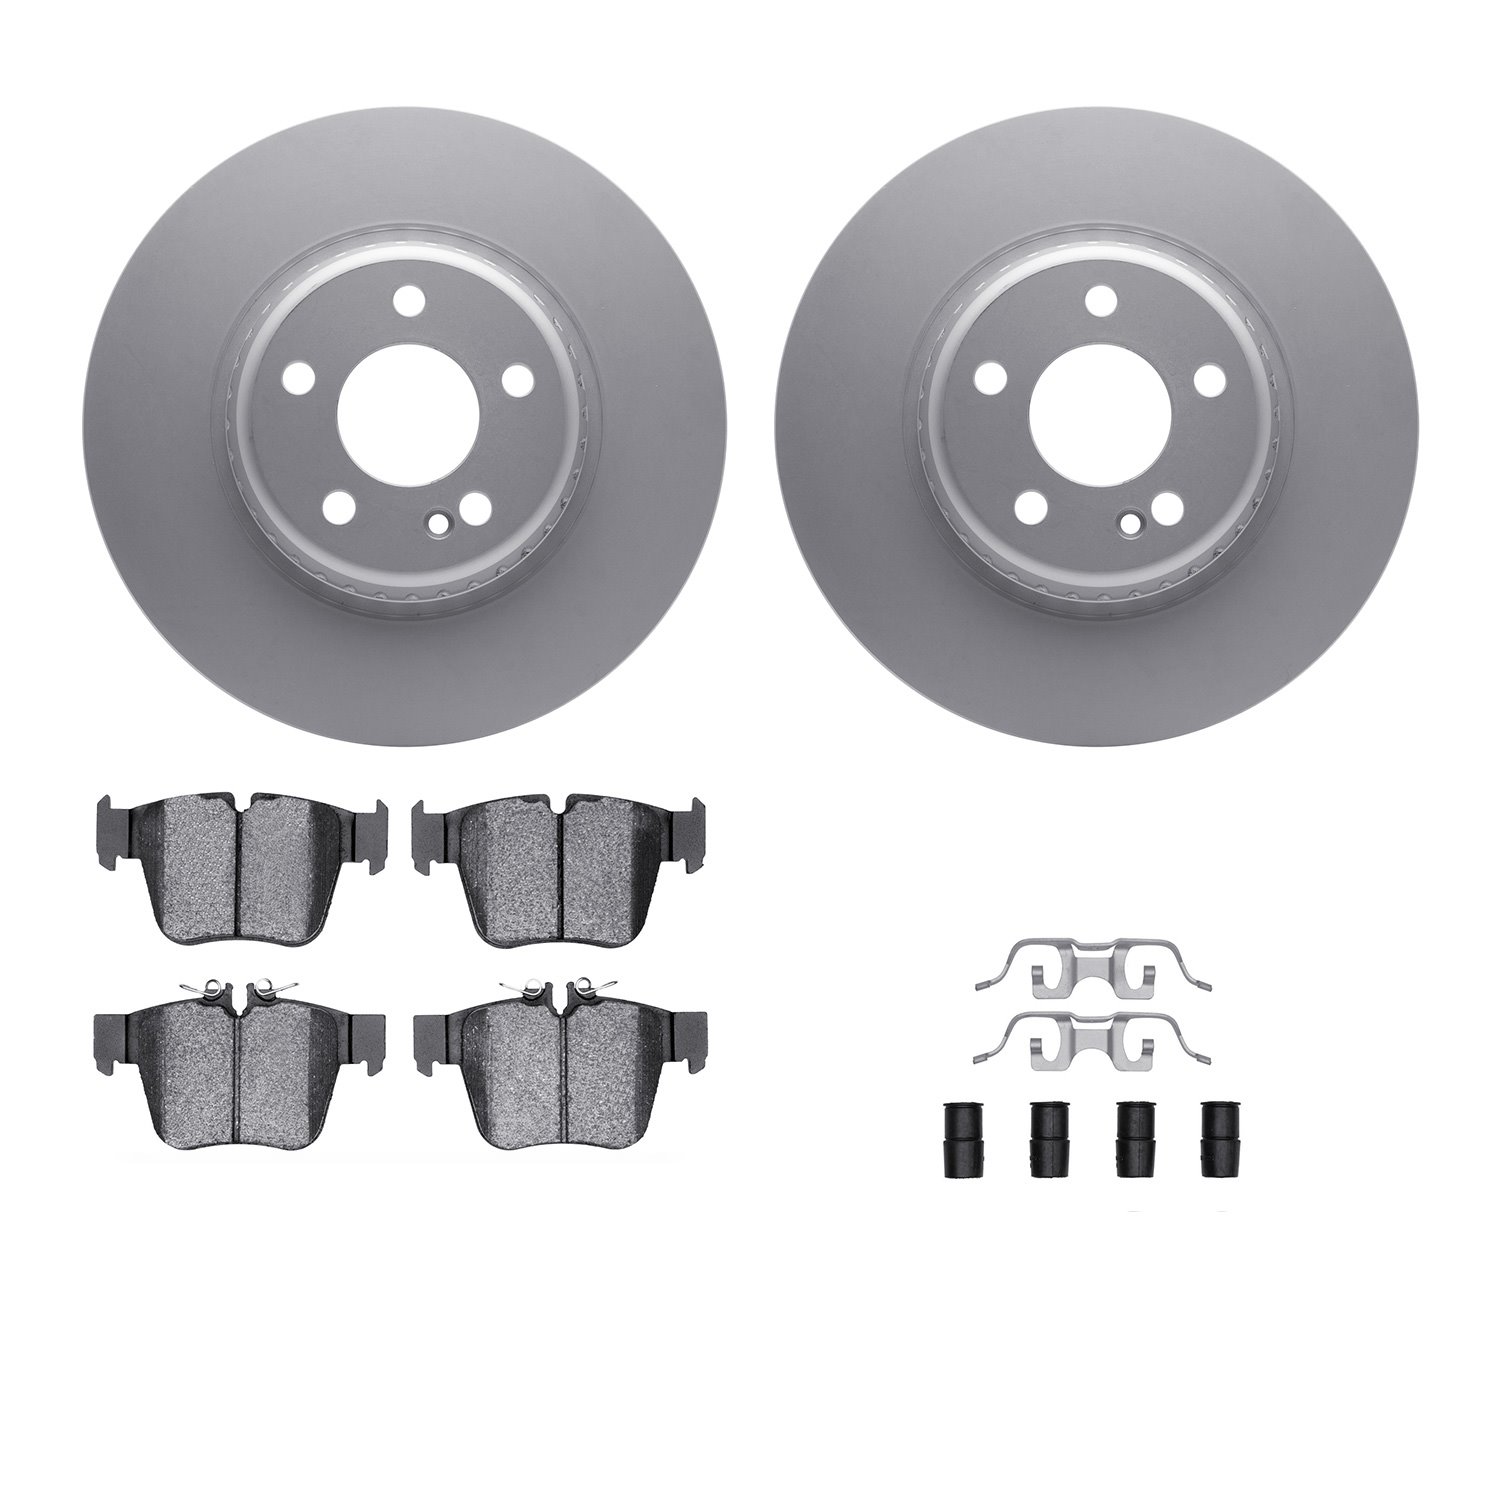 4312-63083 Geospec Brake Rotors with 3000-Series Ceramic Brake Pads & Hardware, Fits Select Mercedes-Benz, Position: Rear